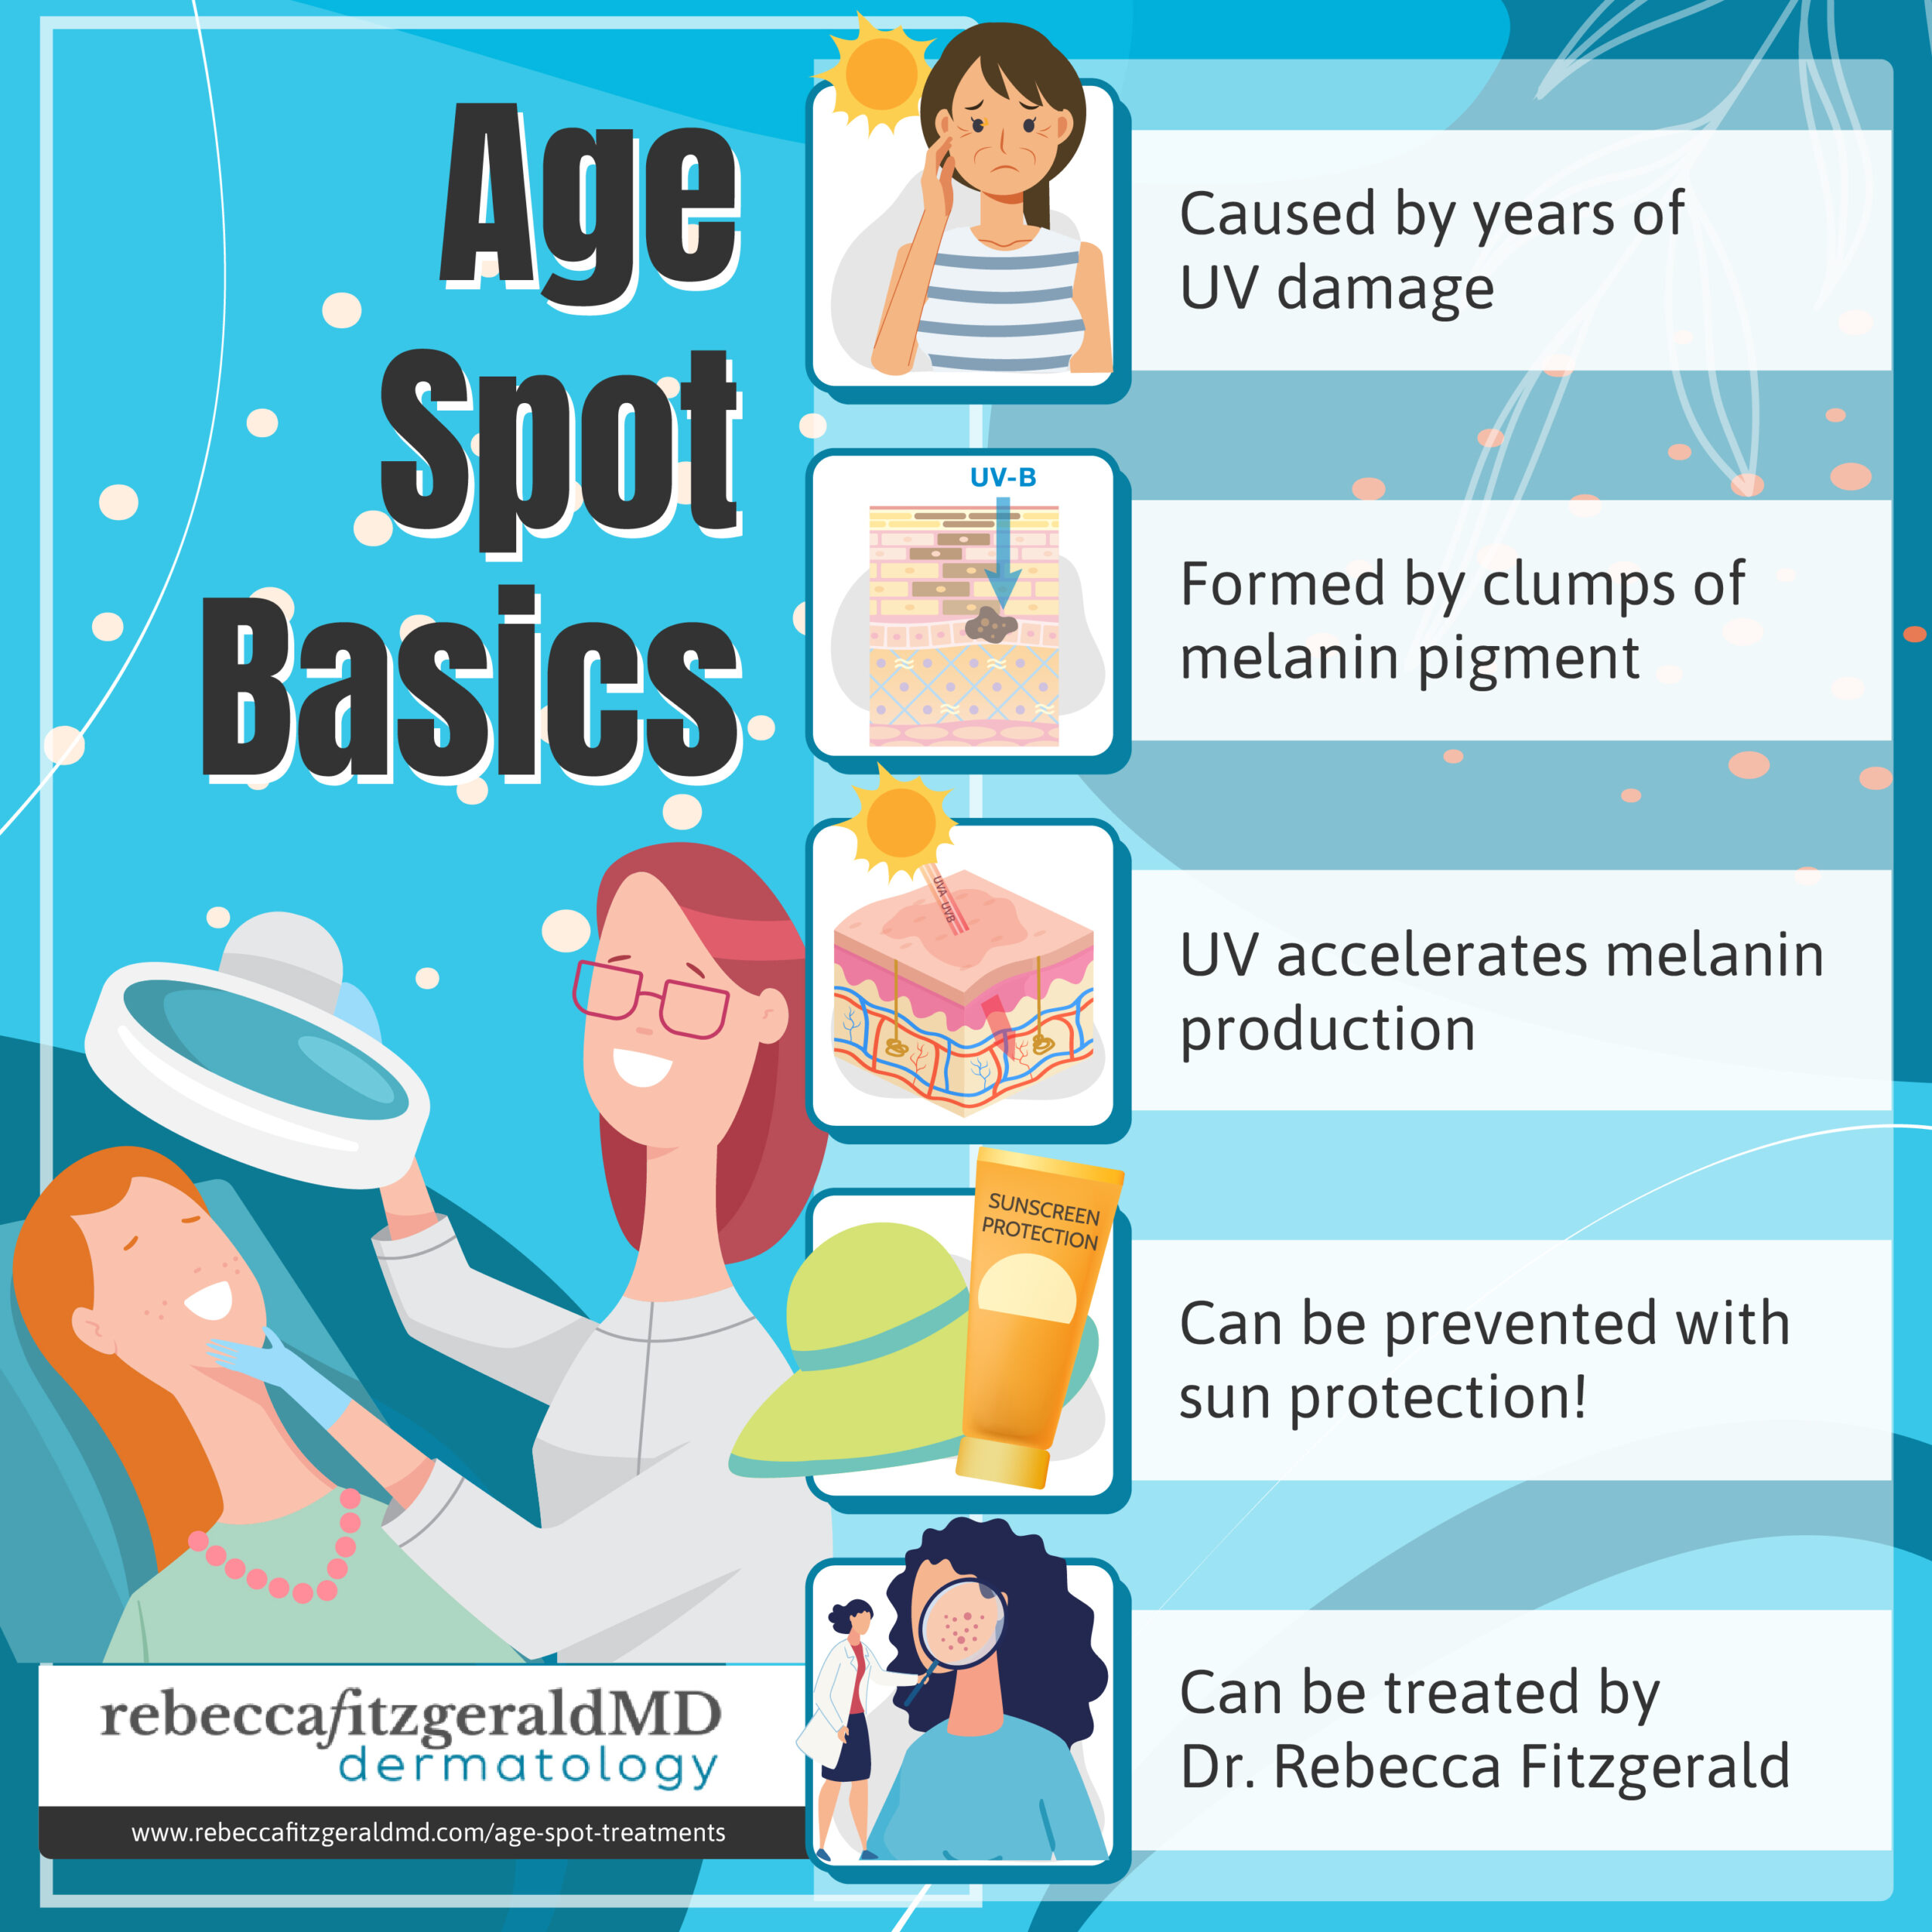 Age spots result of years of UVA exposure, formed by clumps of melanin pigment, accelerated melanin production, can be prevented with sunscreen, can be treated to reduce